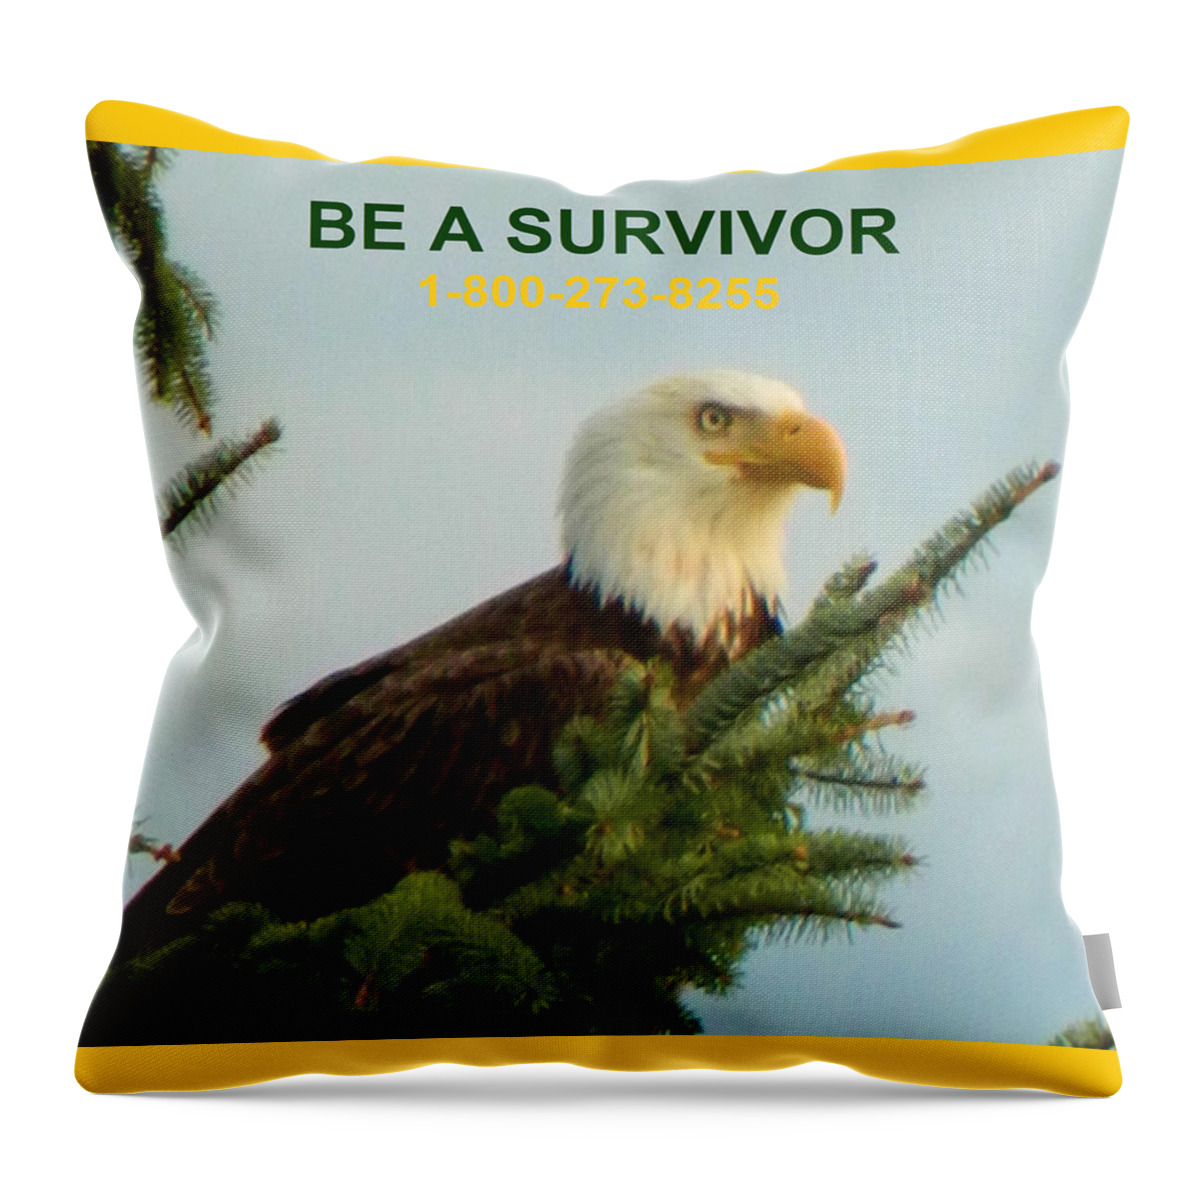 Eagles Throw Pillow featuring the photograph Be A Survivor with phone number by Gallery Of Hope 